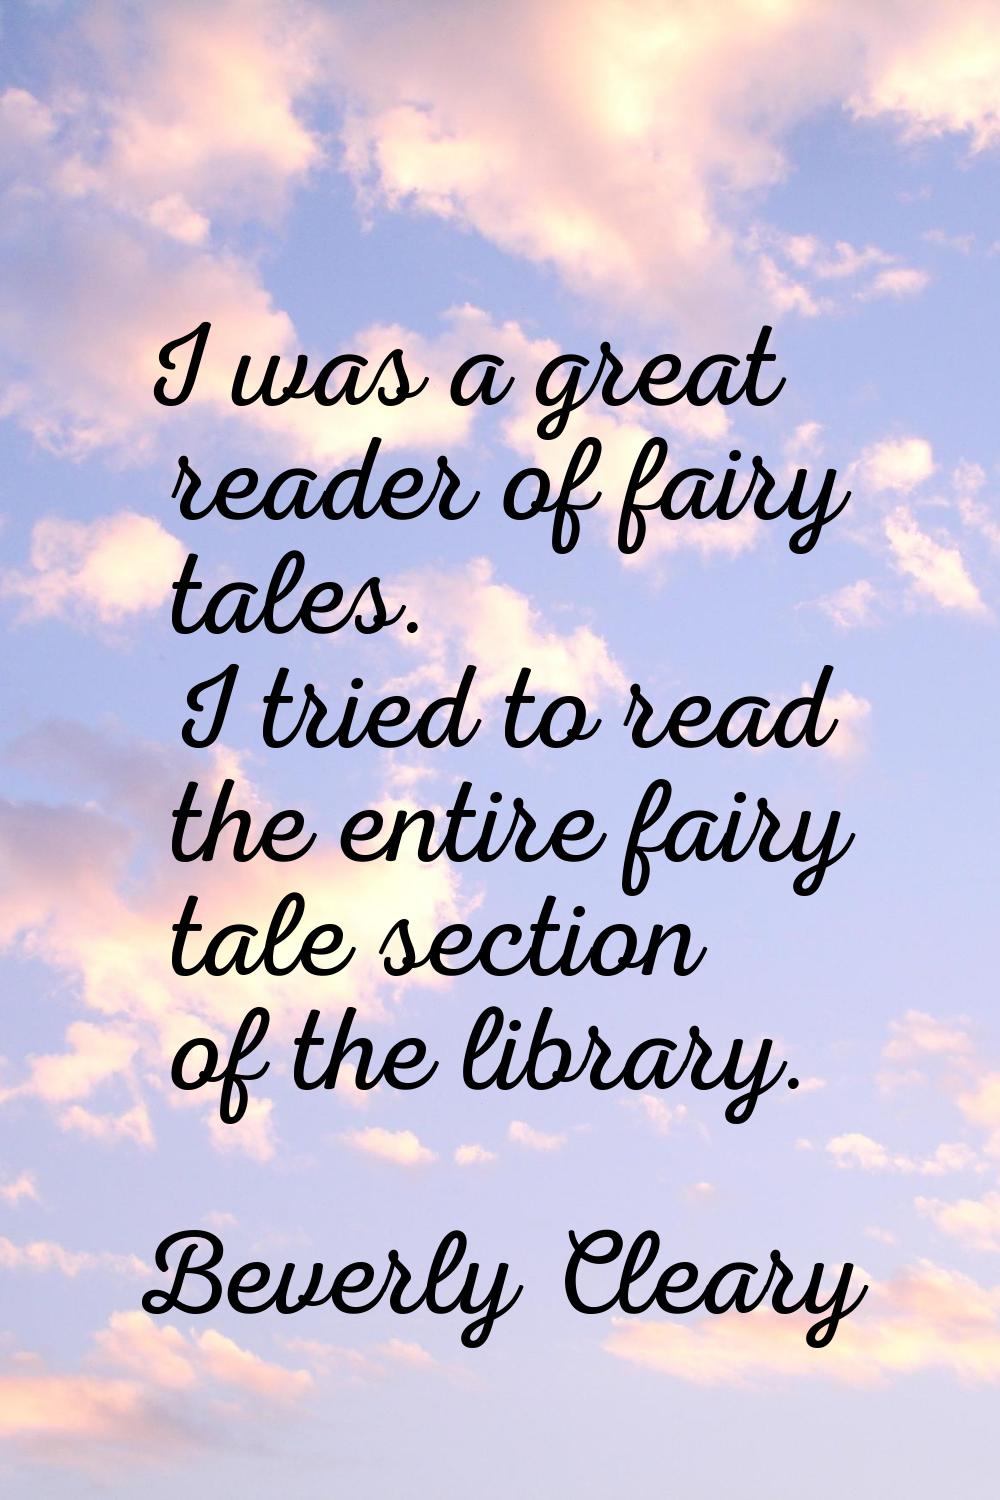 I was a great reader of fairy tales. I tried to read the entire fairy tale section of the library.